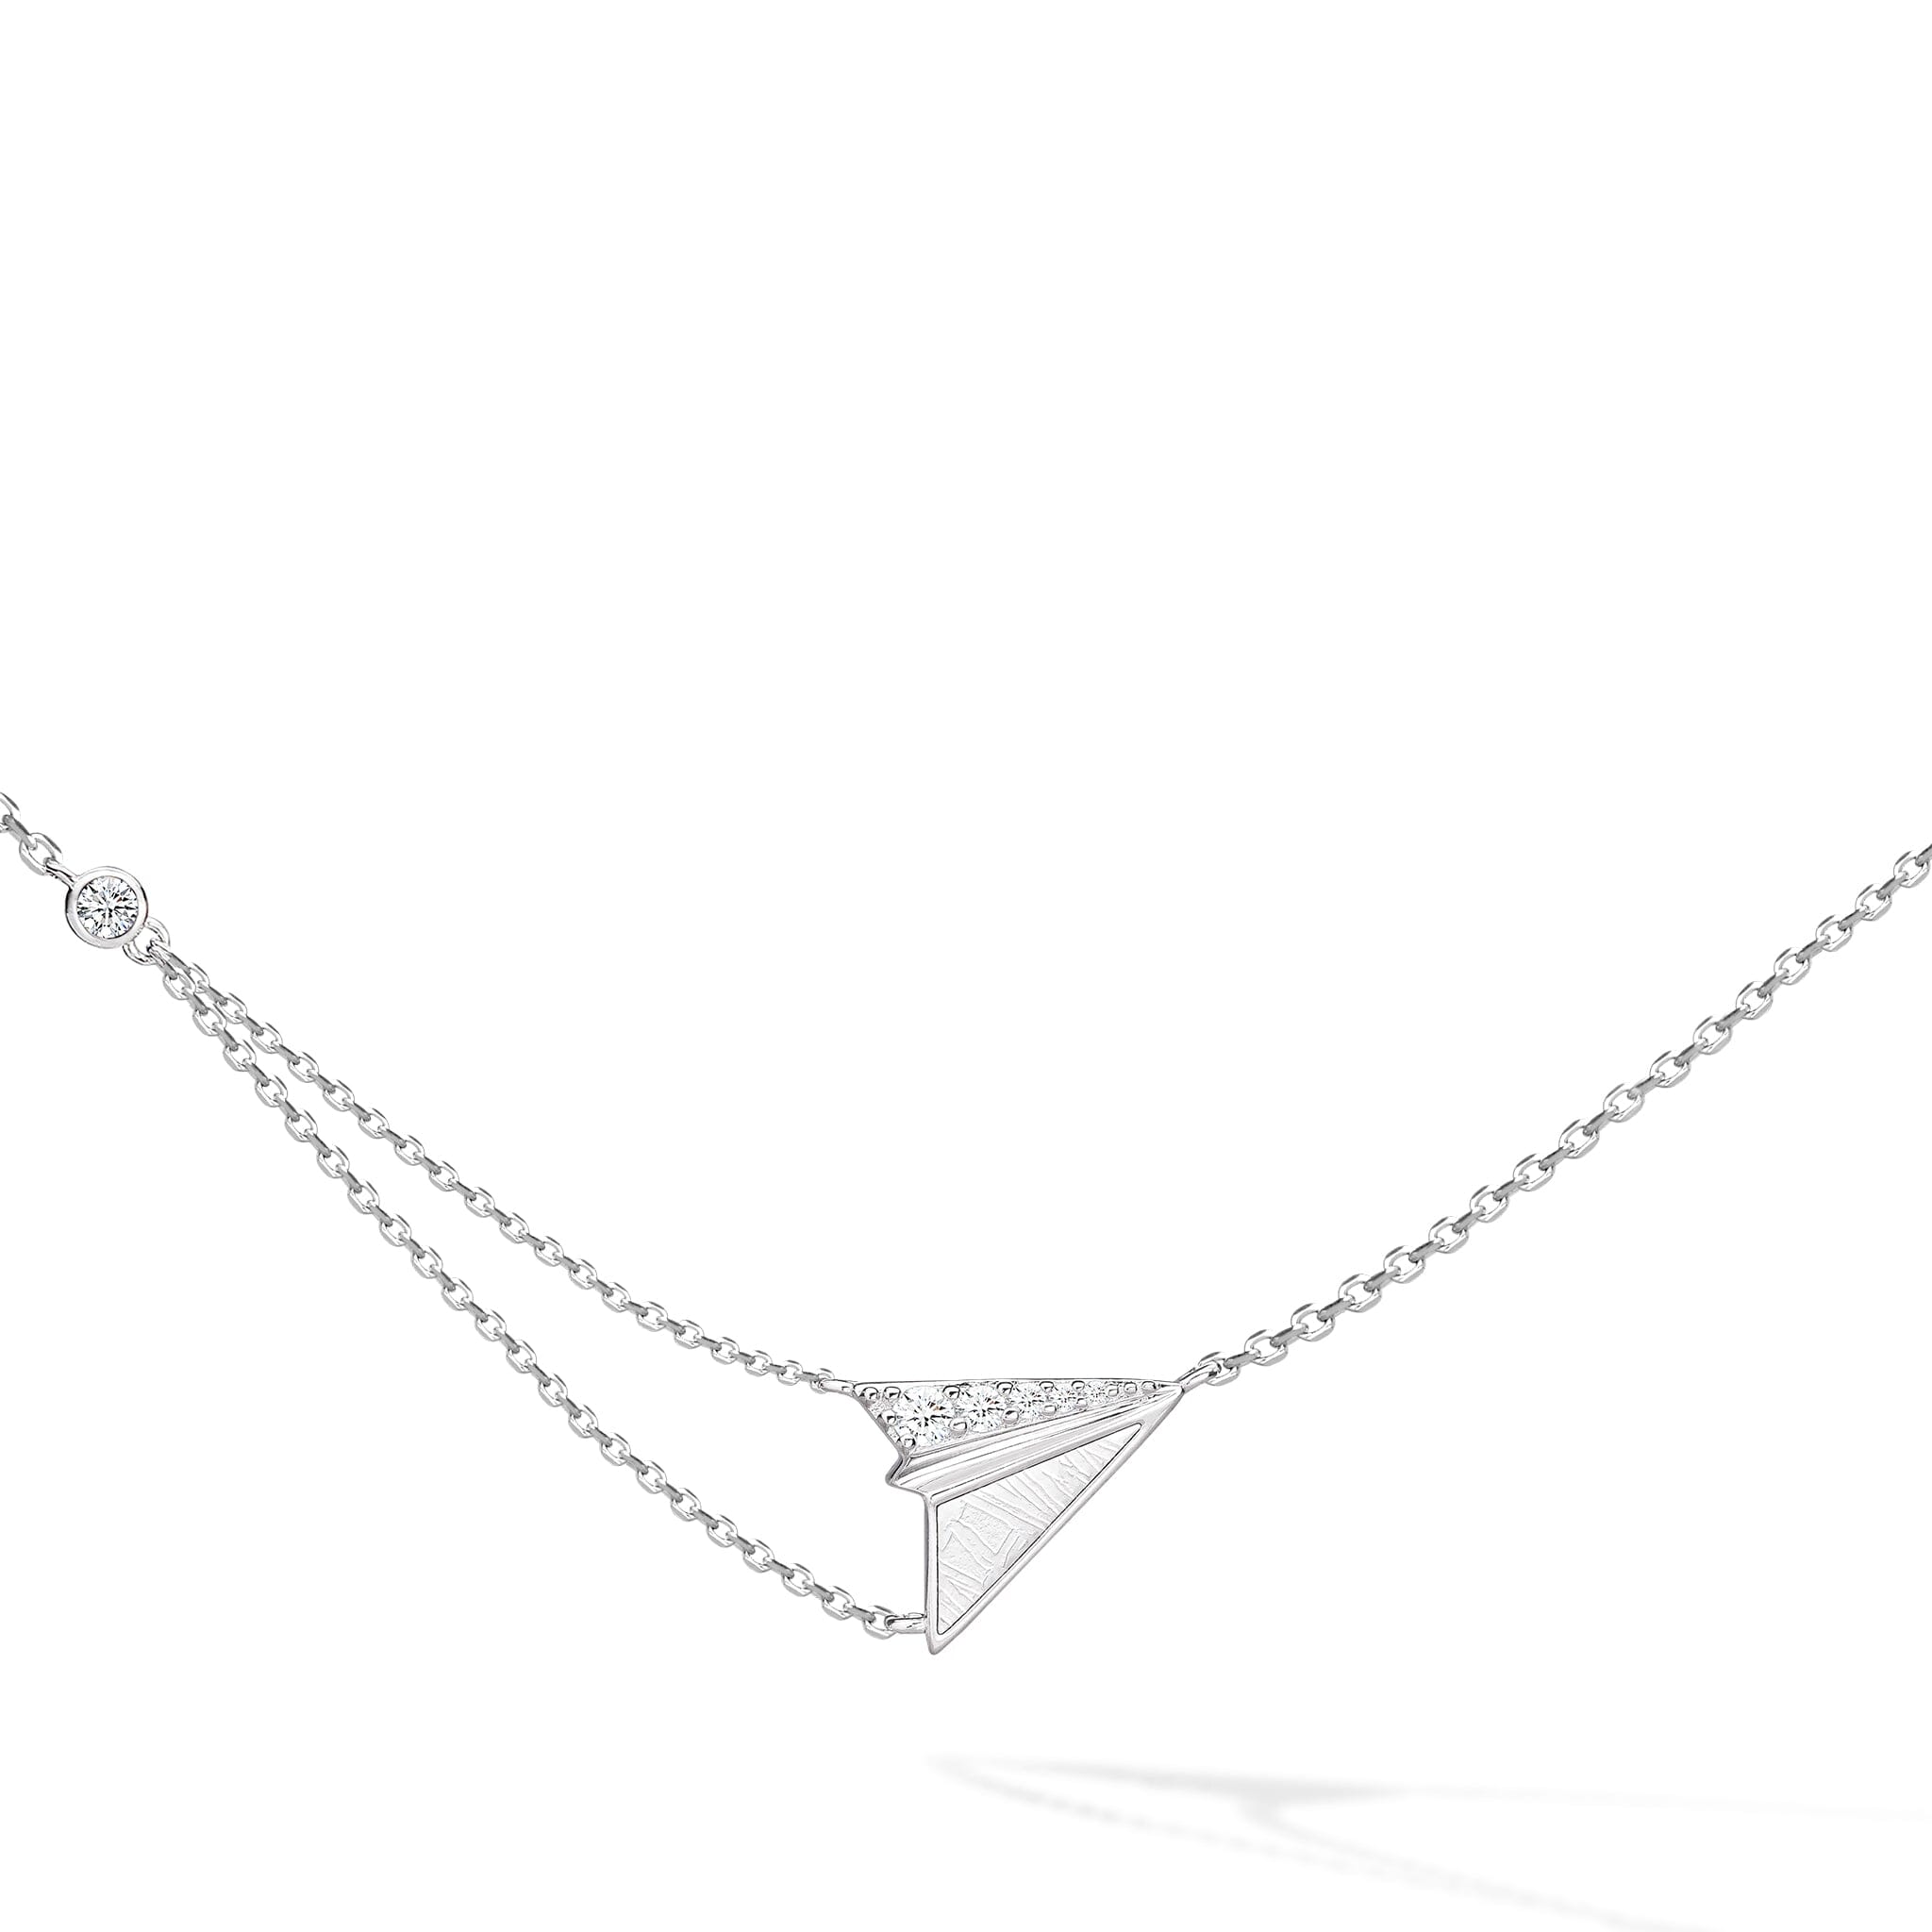 Women's Paper Airplane Necklace with Meteorite Necklaces WAA FASHION GROUP 